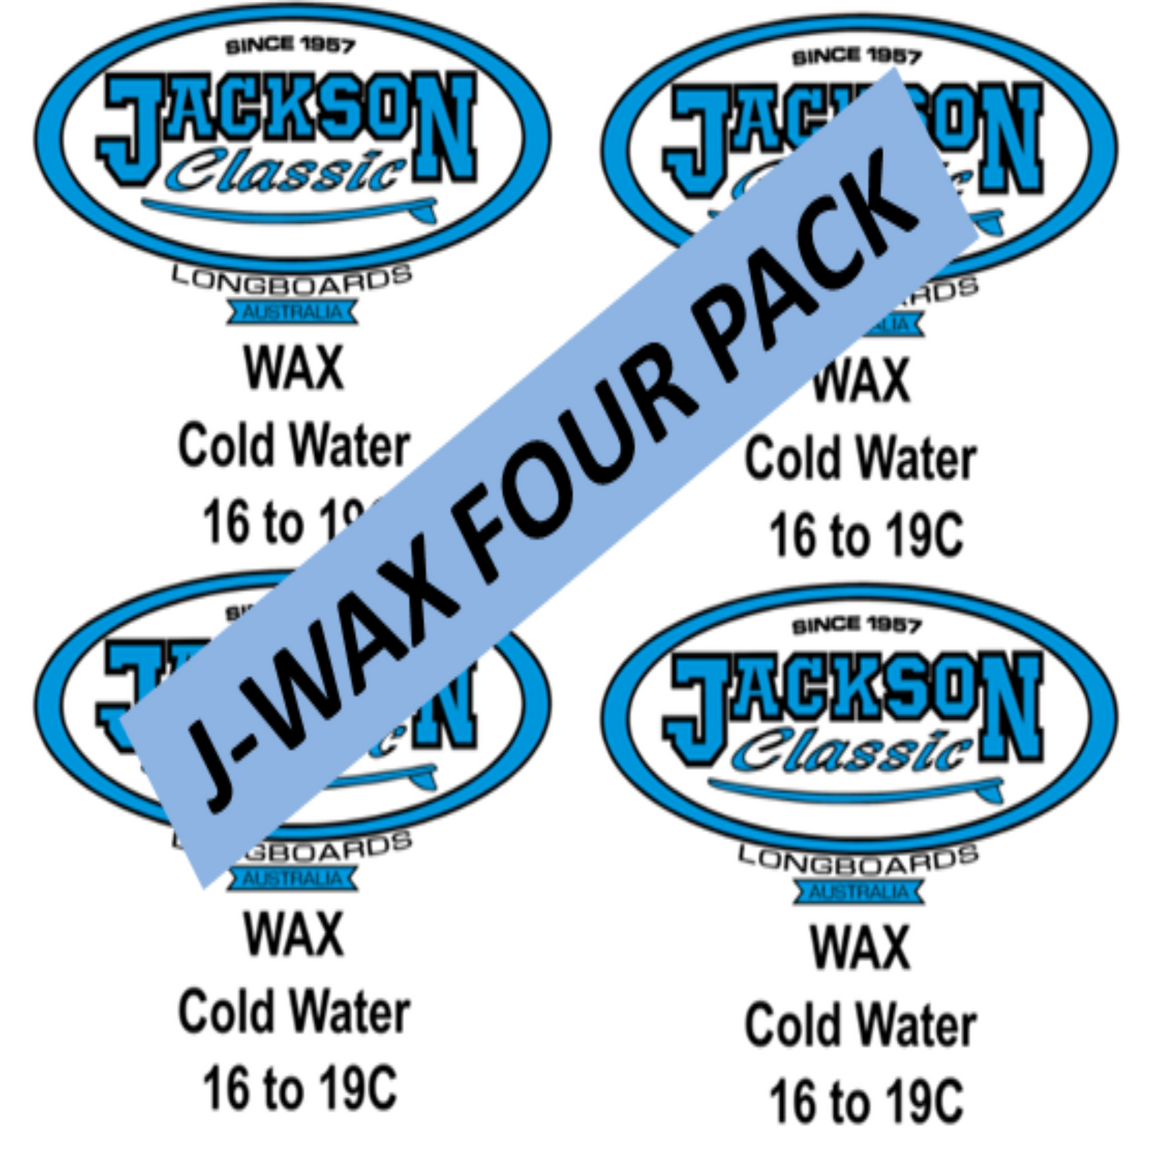 Wax - Cold Water - VALUE FOUR PACK